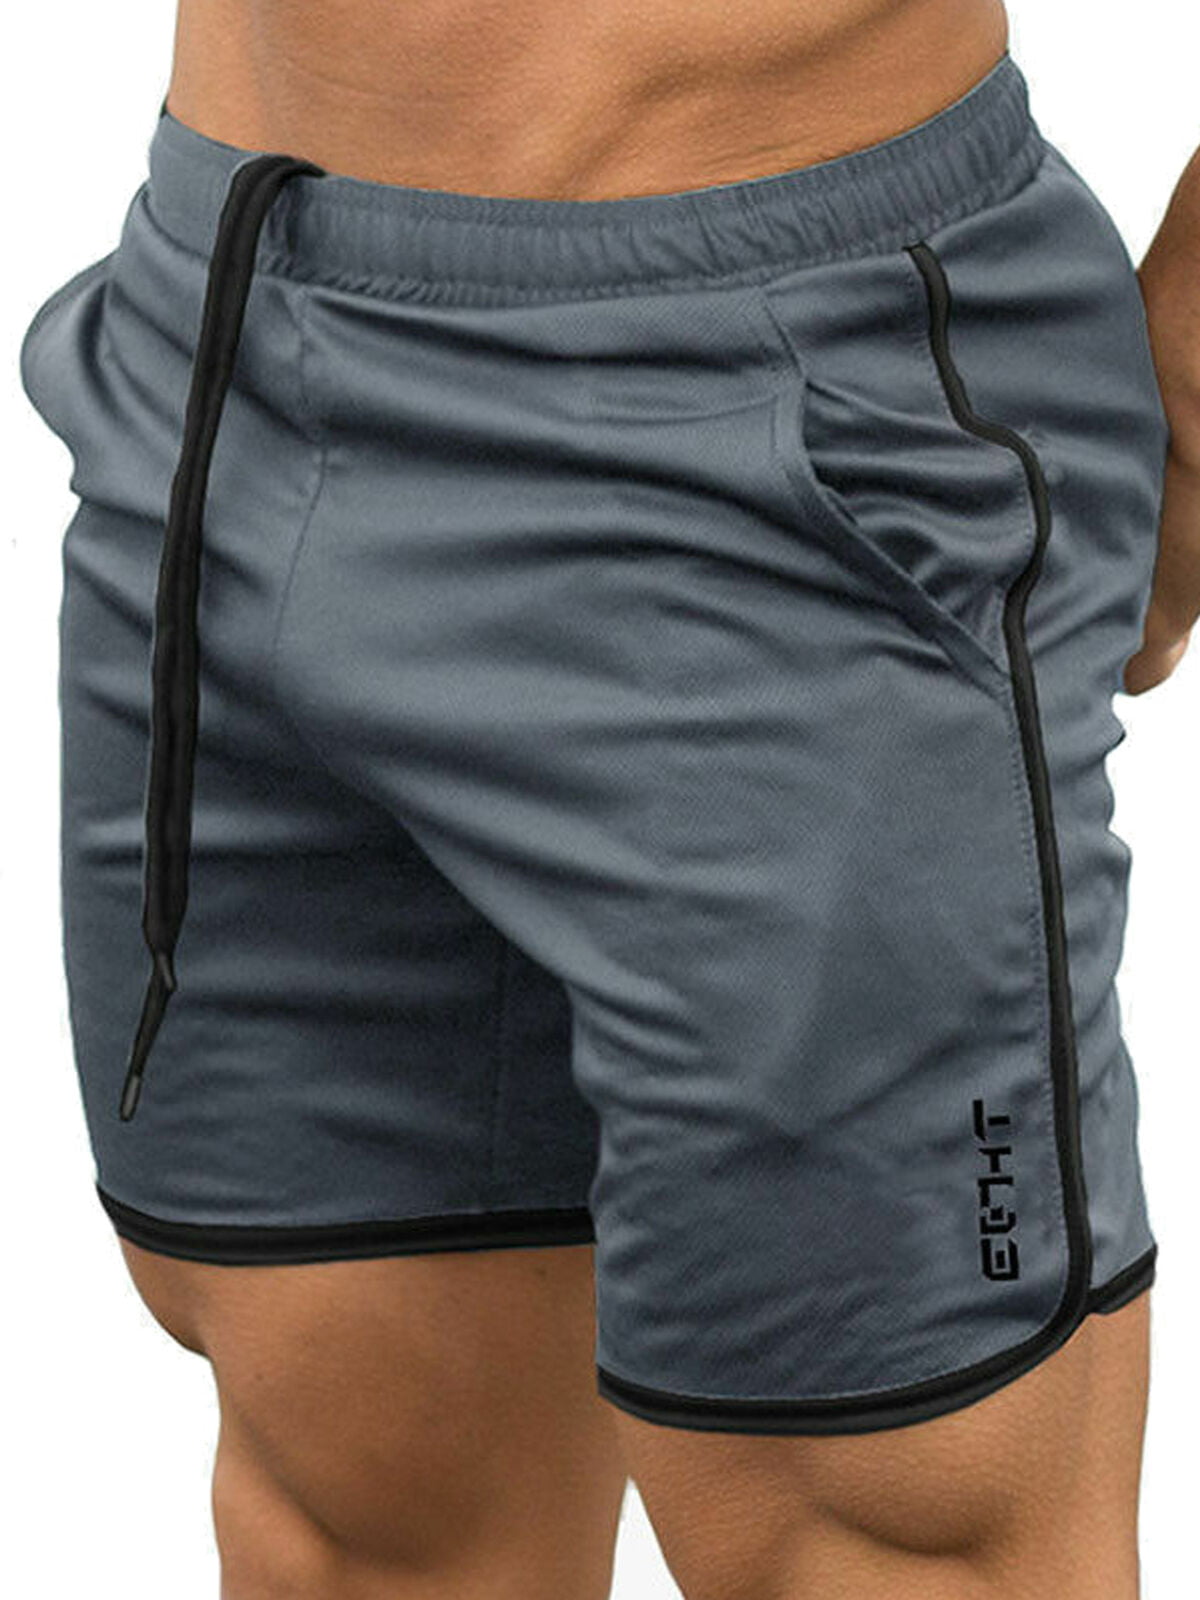 Men's GYM Shorts Training Running Sport Workout Casual Jogging Pants Trousers @^